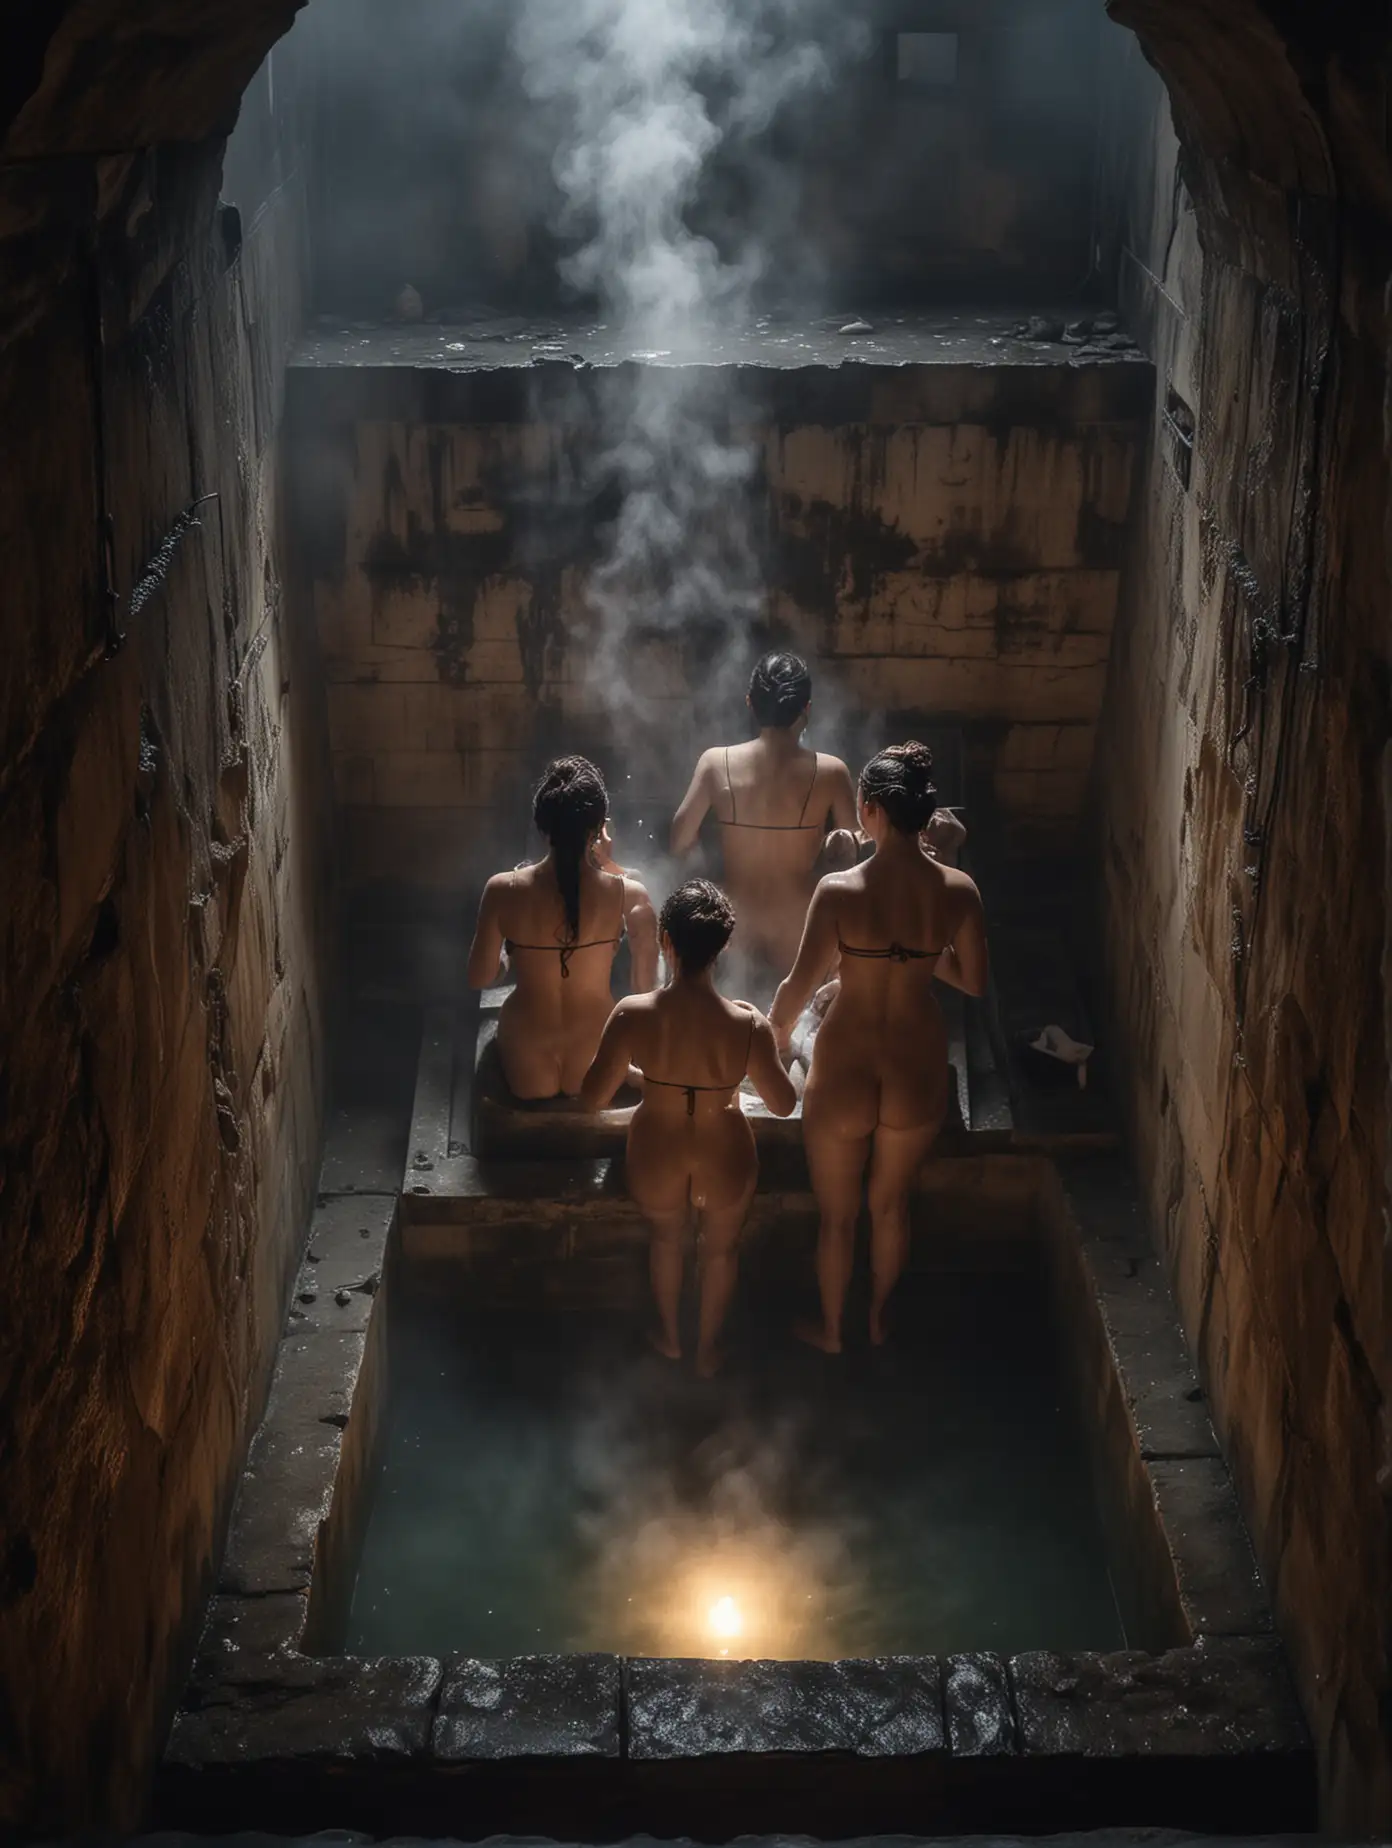 View of 3 bathing women in a basin in dark Roman bath from a window above at night, steam, misty atmosphere